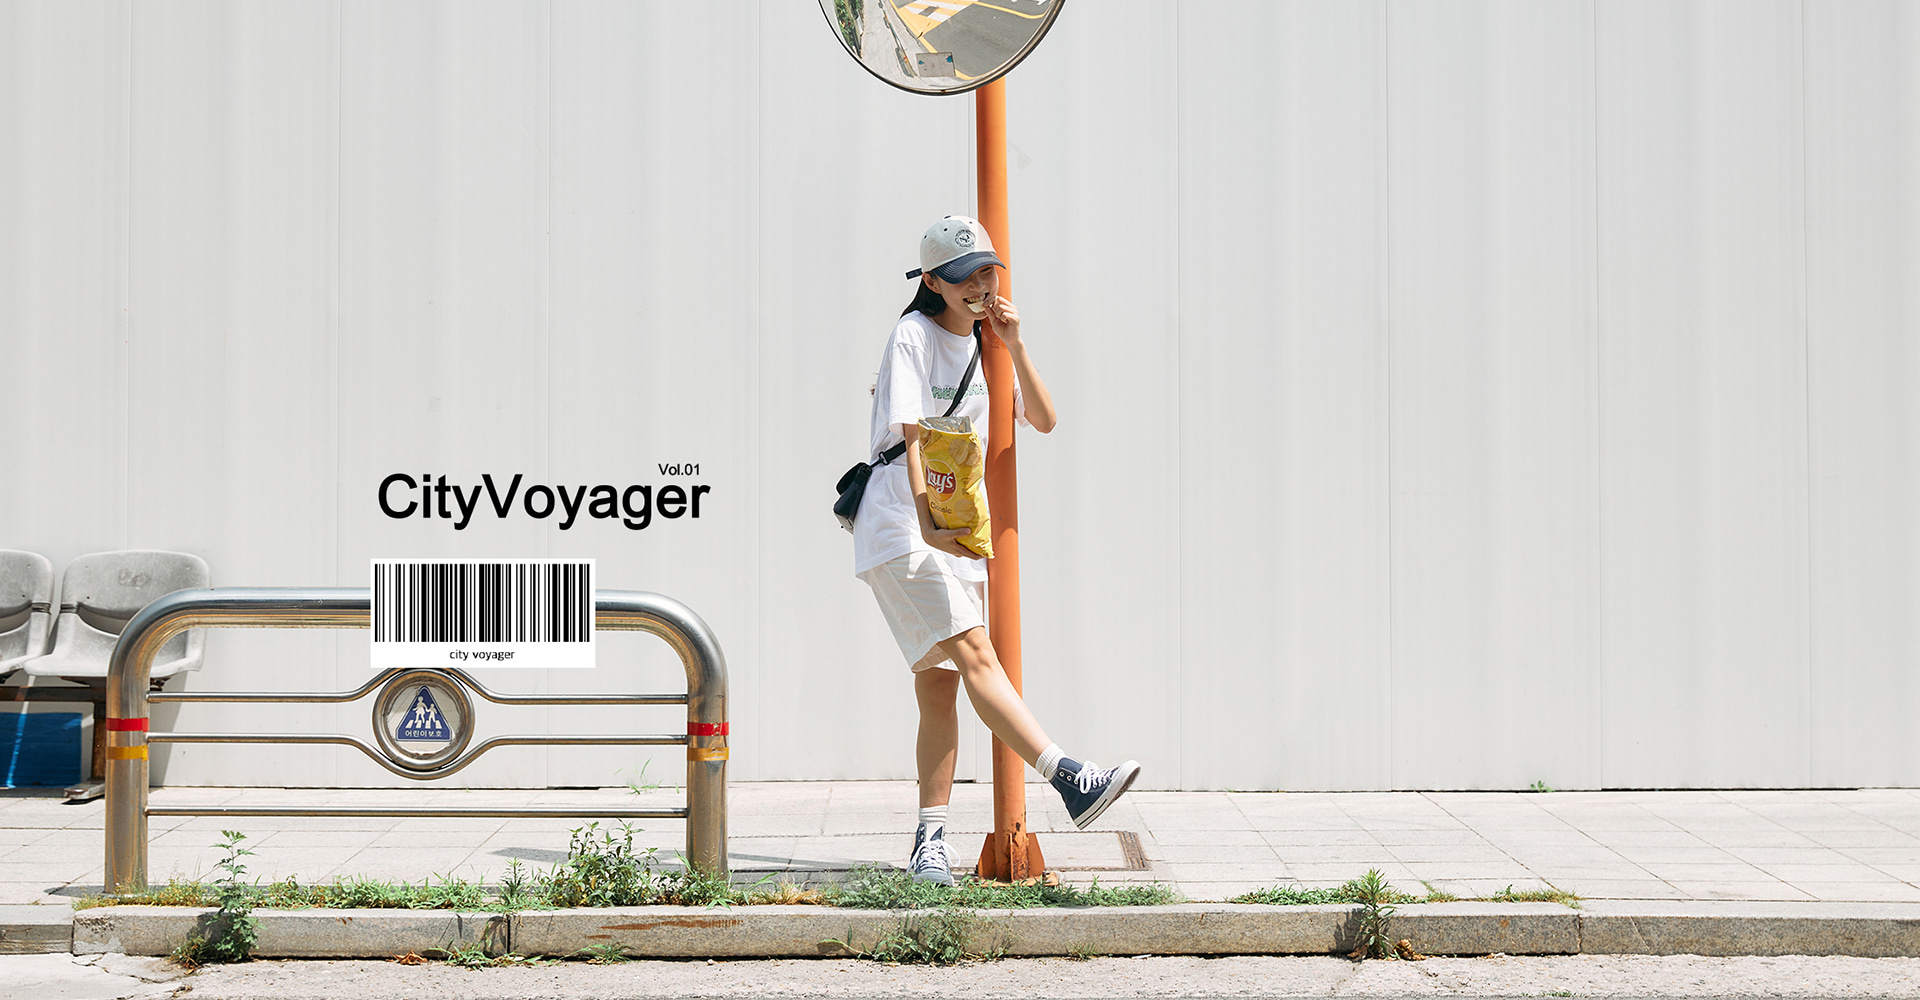 City voyager